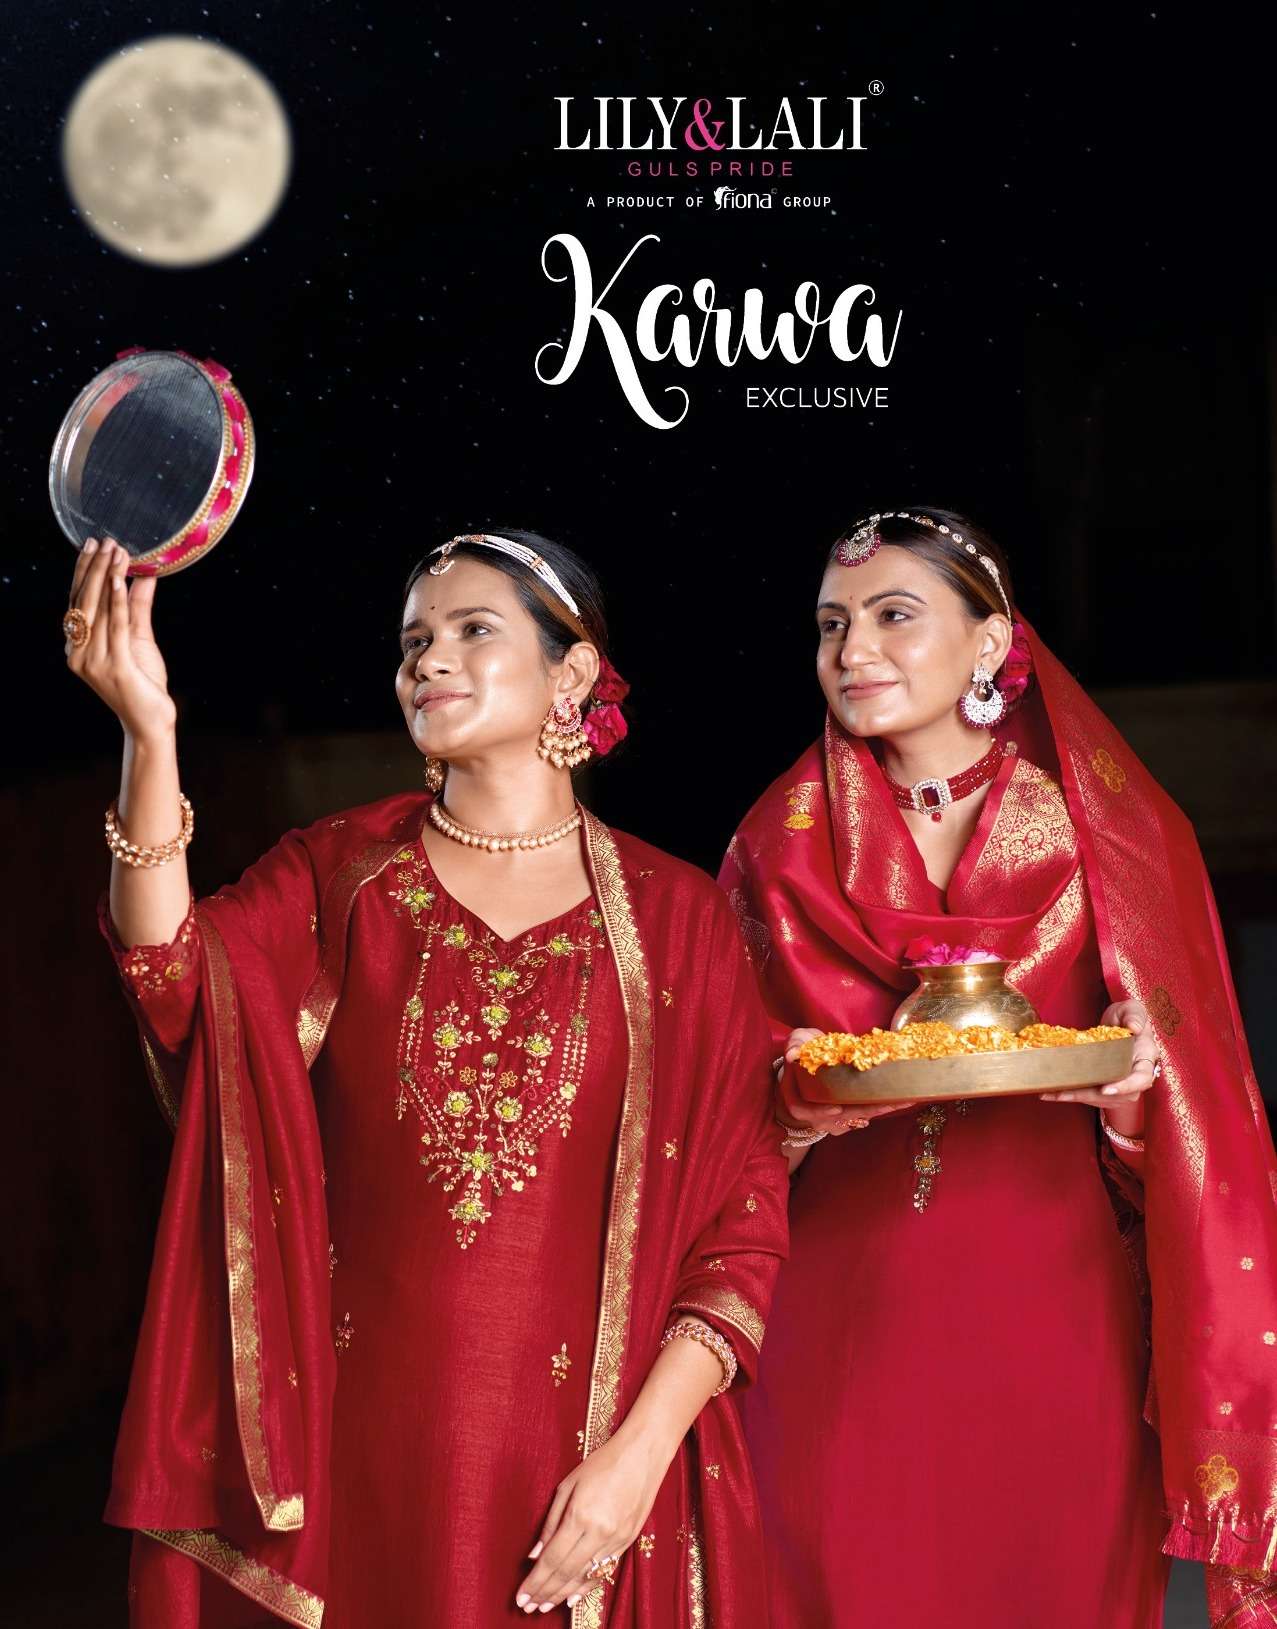 lily & lali present karwa exclusive party wear readymade 3 peice set catalog